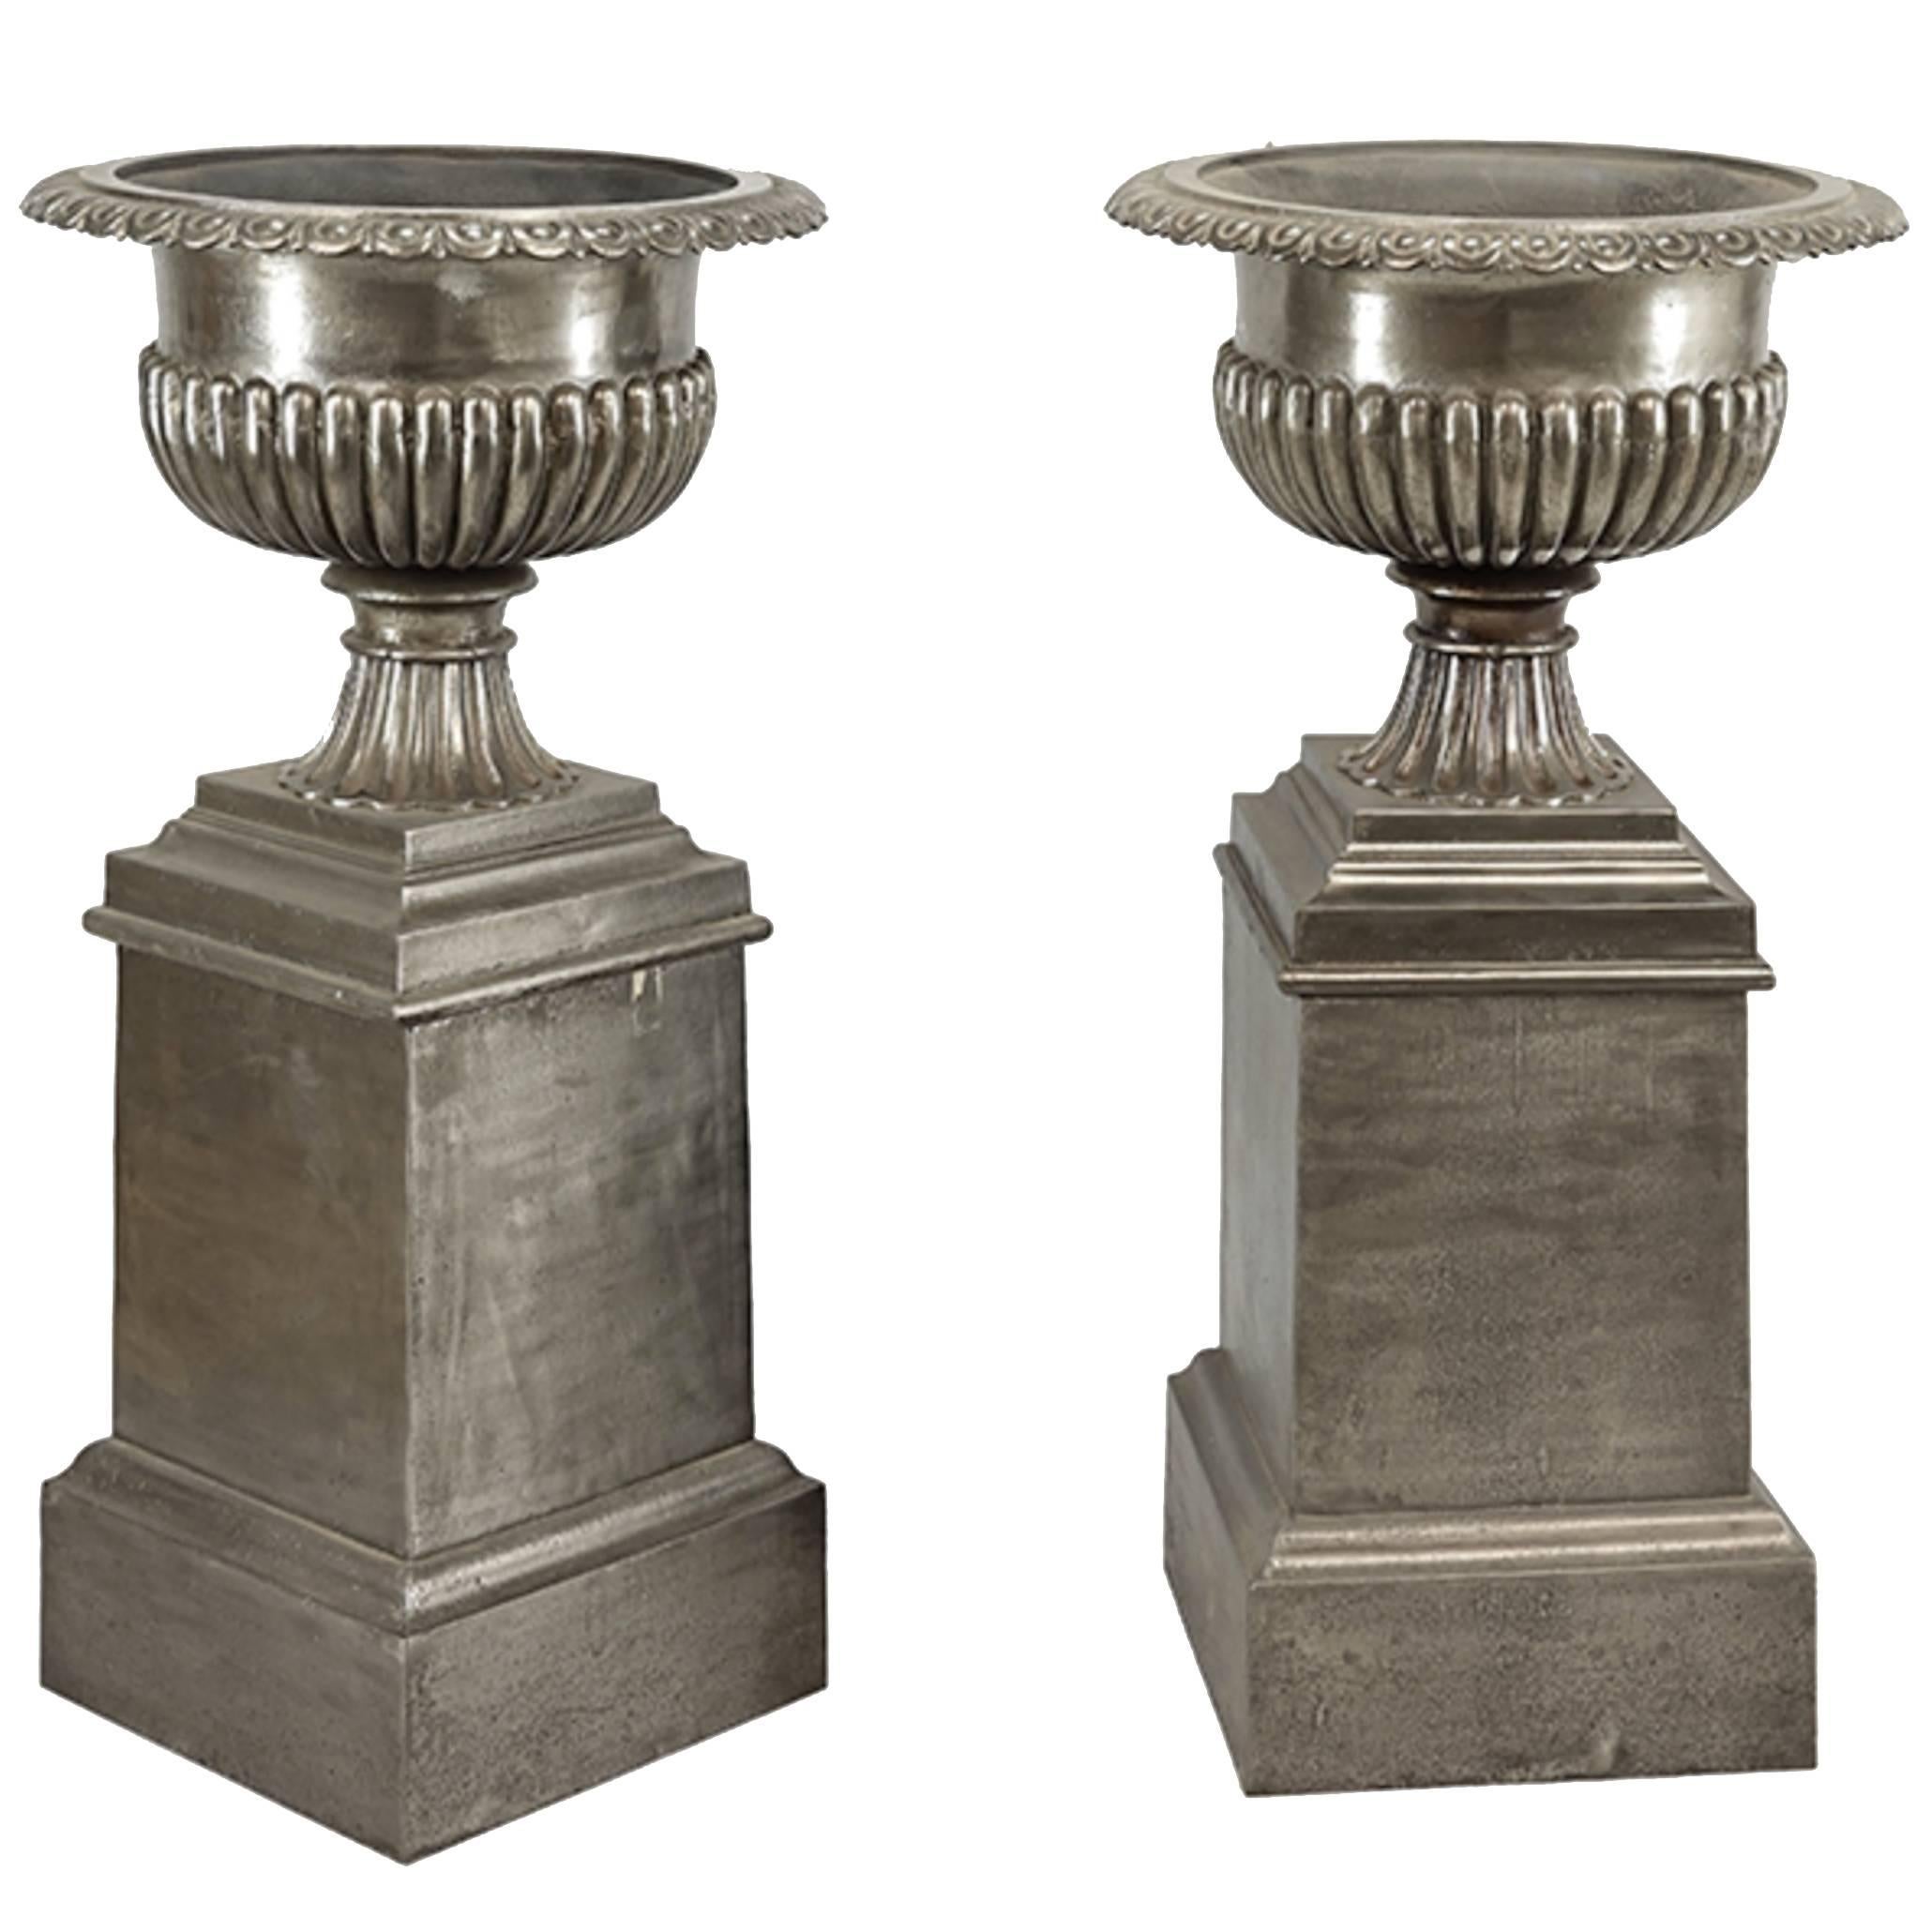 One Pair Very Stately 19th Century English Urns on Stands, Brushed Steel Finish For Sale